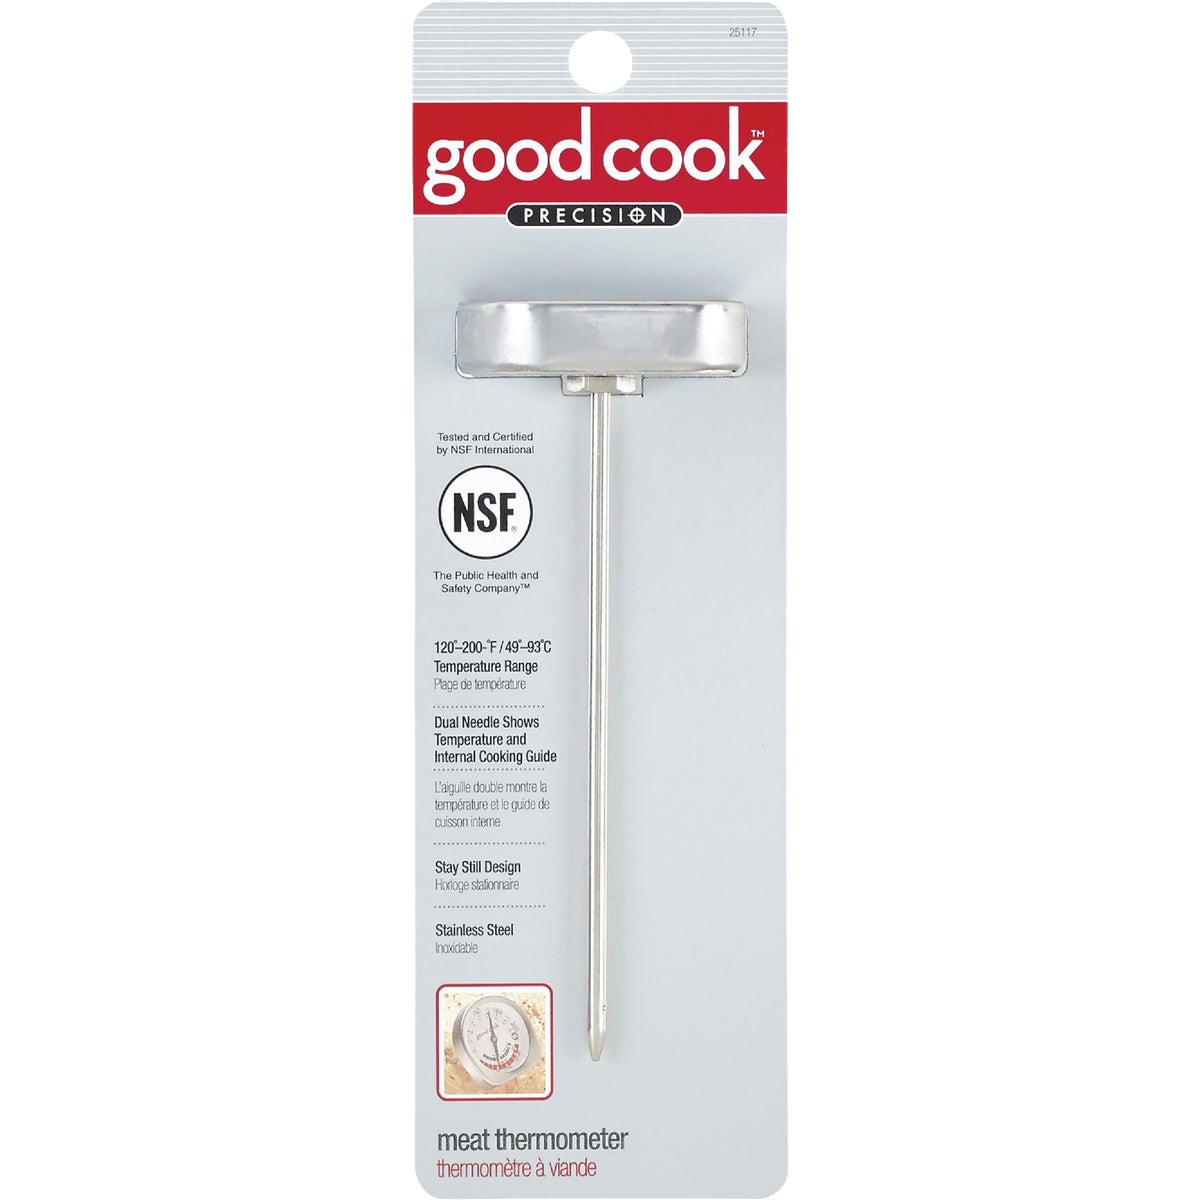 Goodcook Precision Meat Thermometer